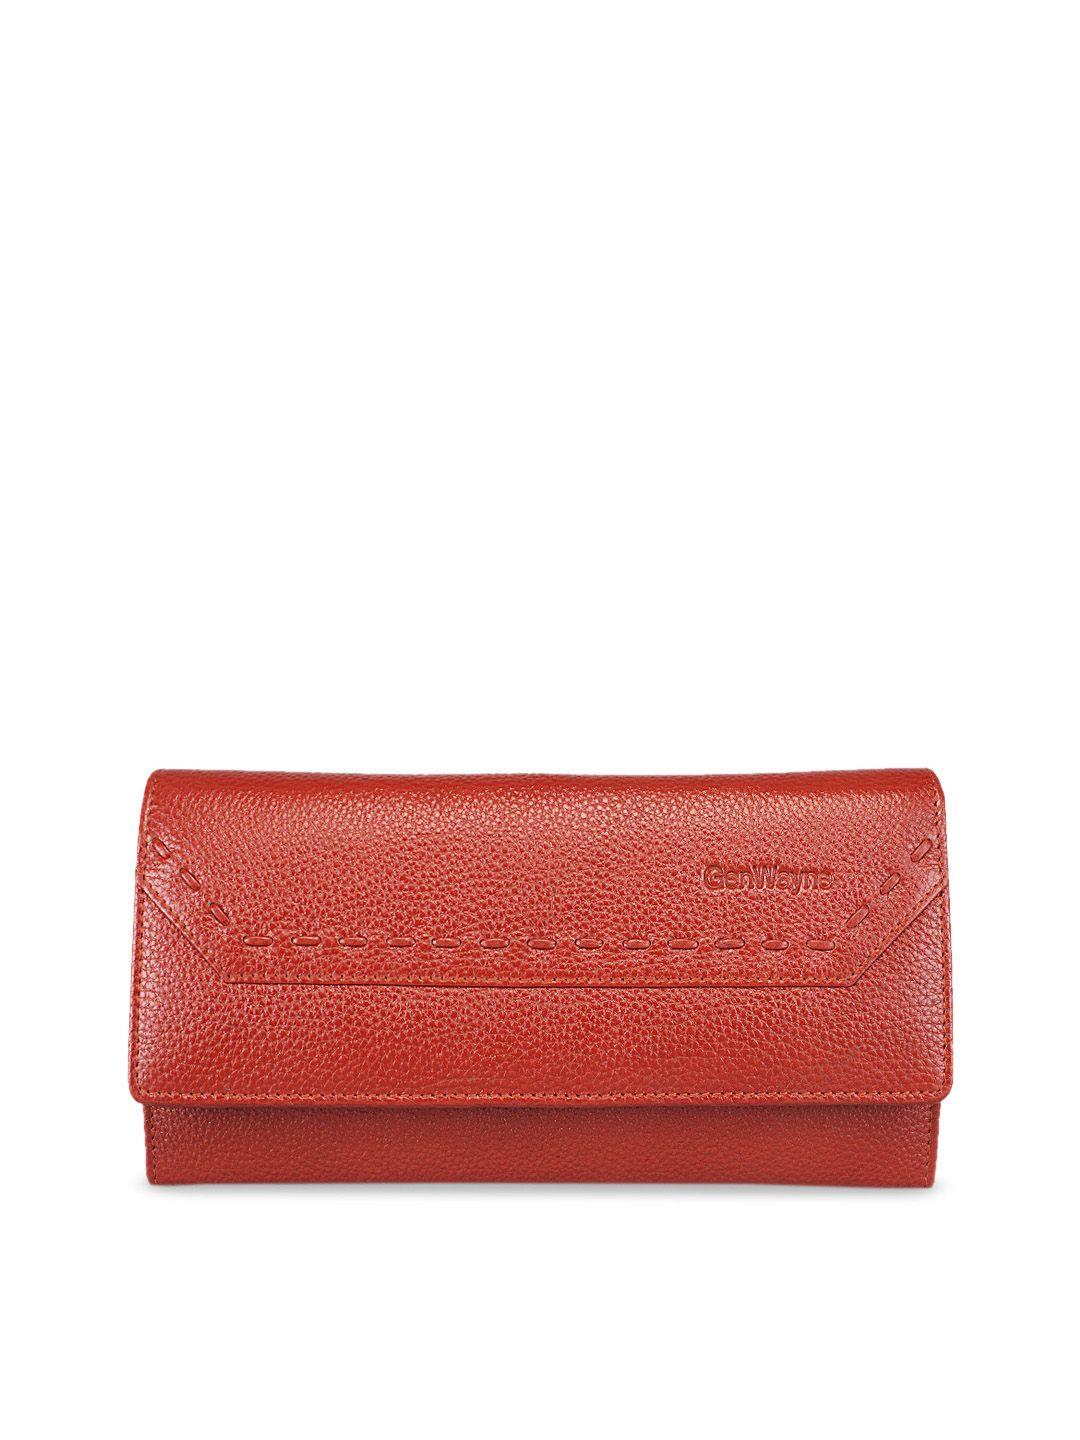 genwayne red solid leather purse clutch